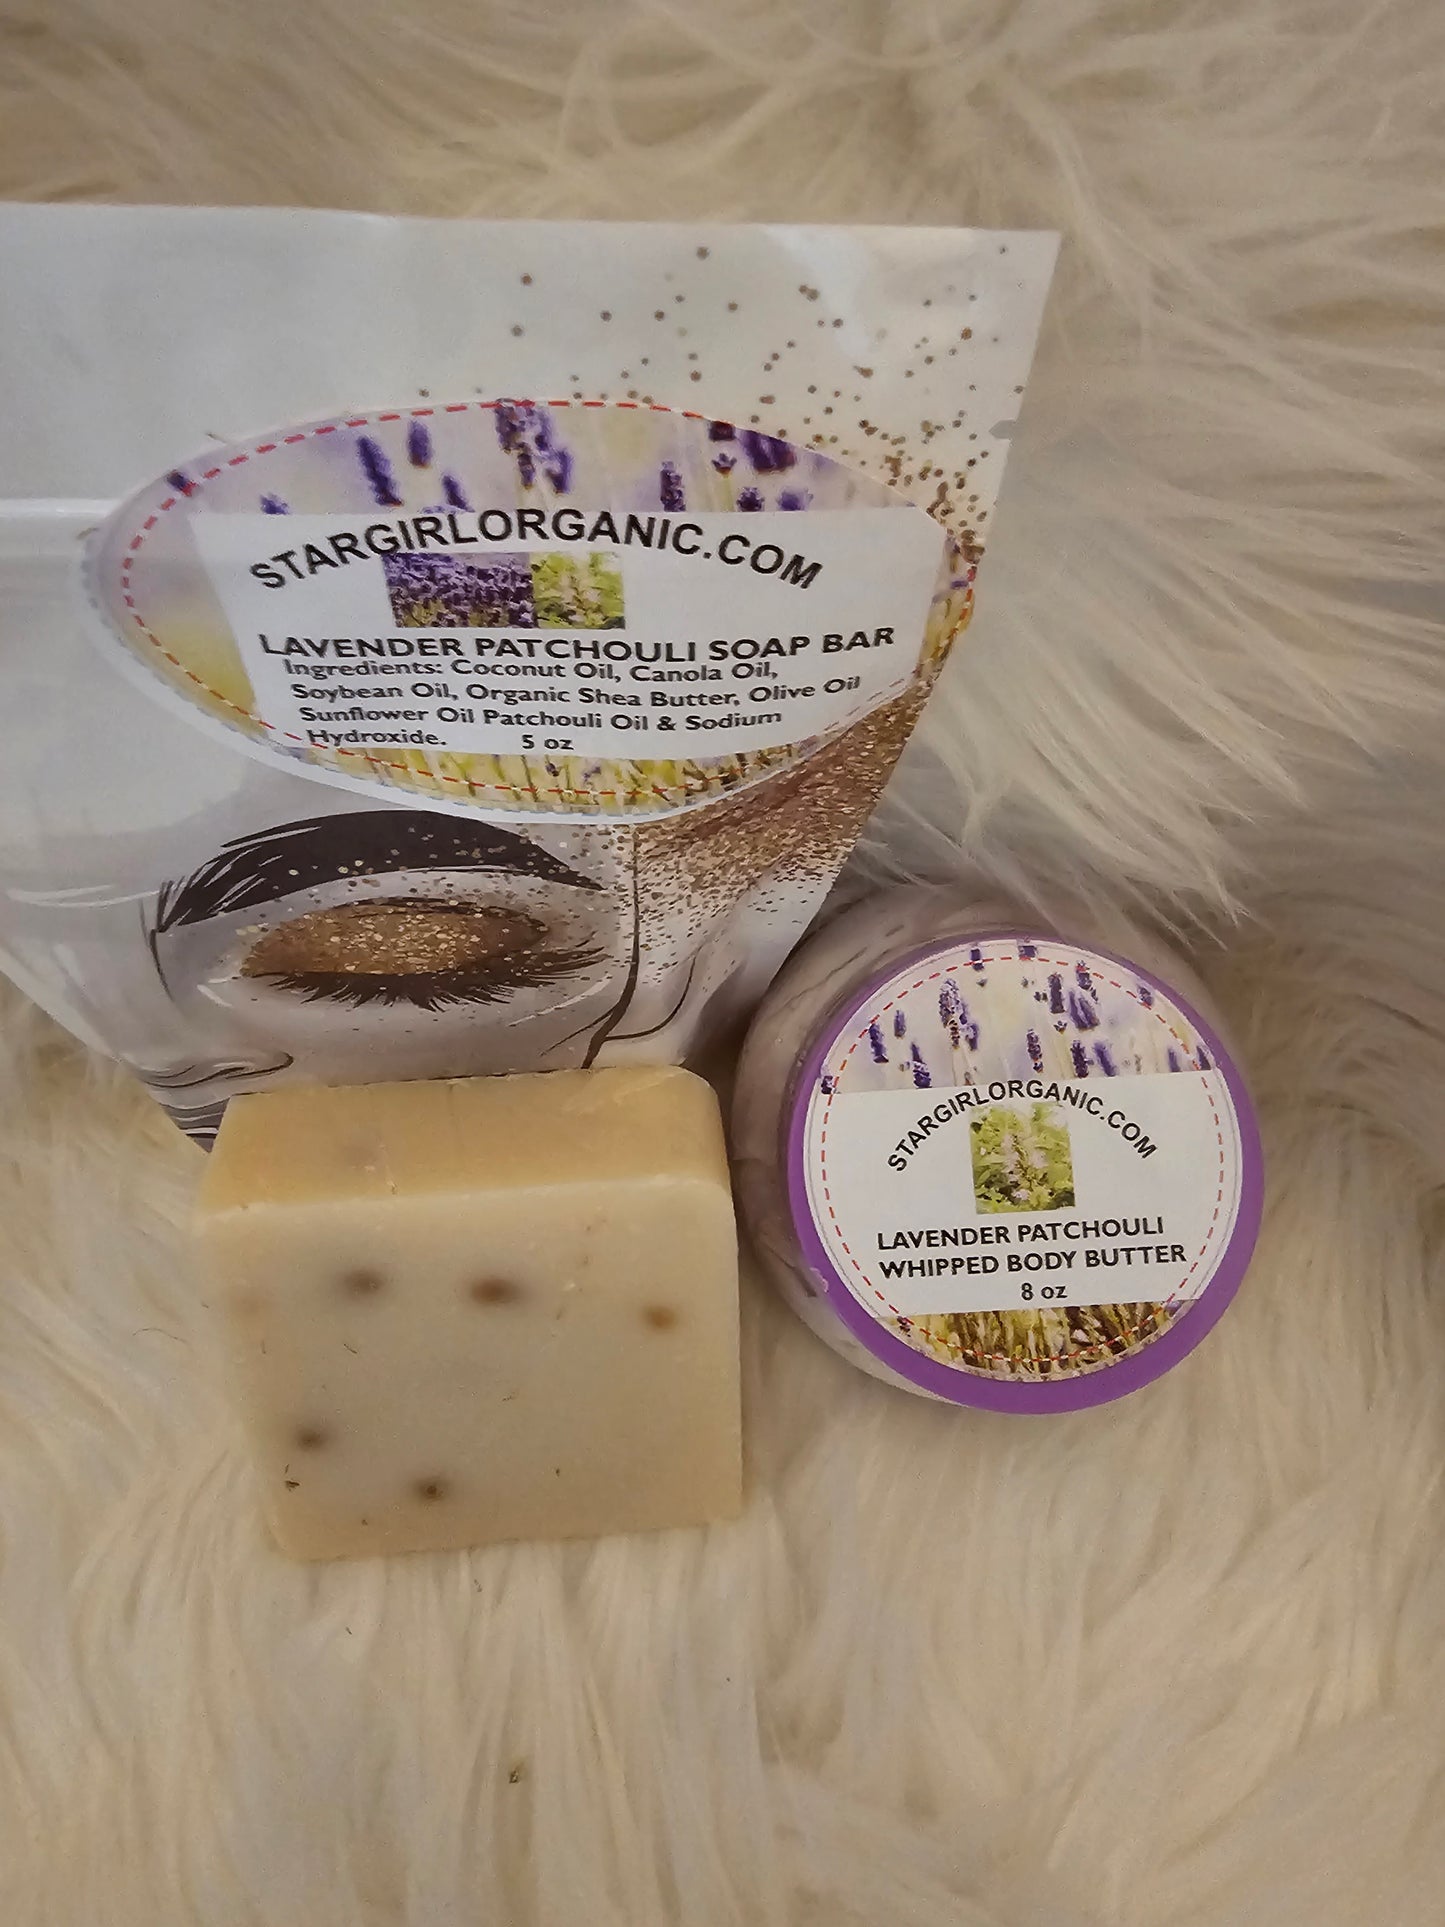 2ps Set Lavender and Patchouli Soap Bar and Lavender and Patchouli Whipped Body Butter